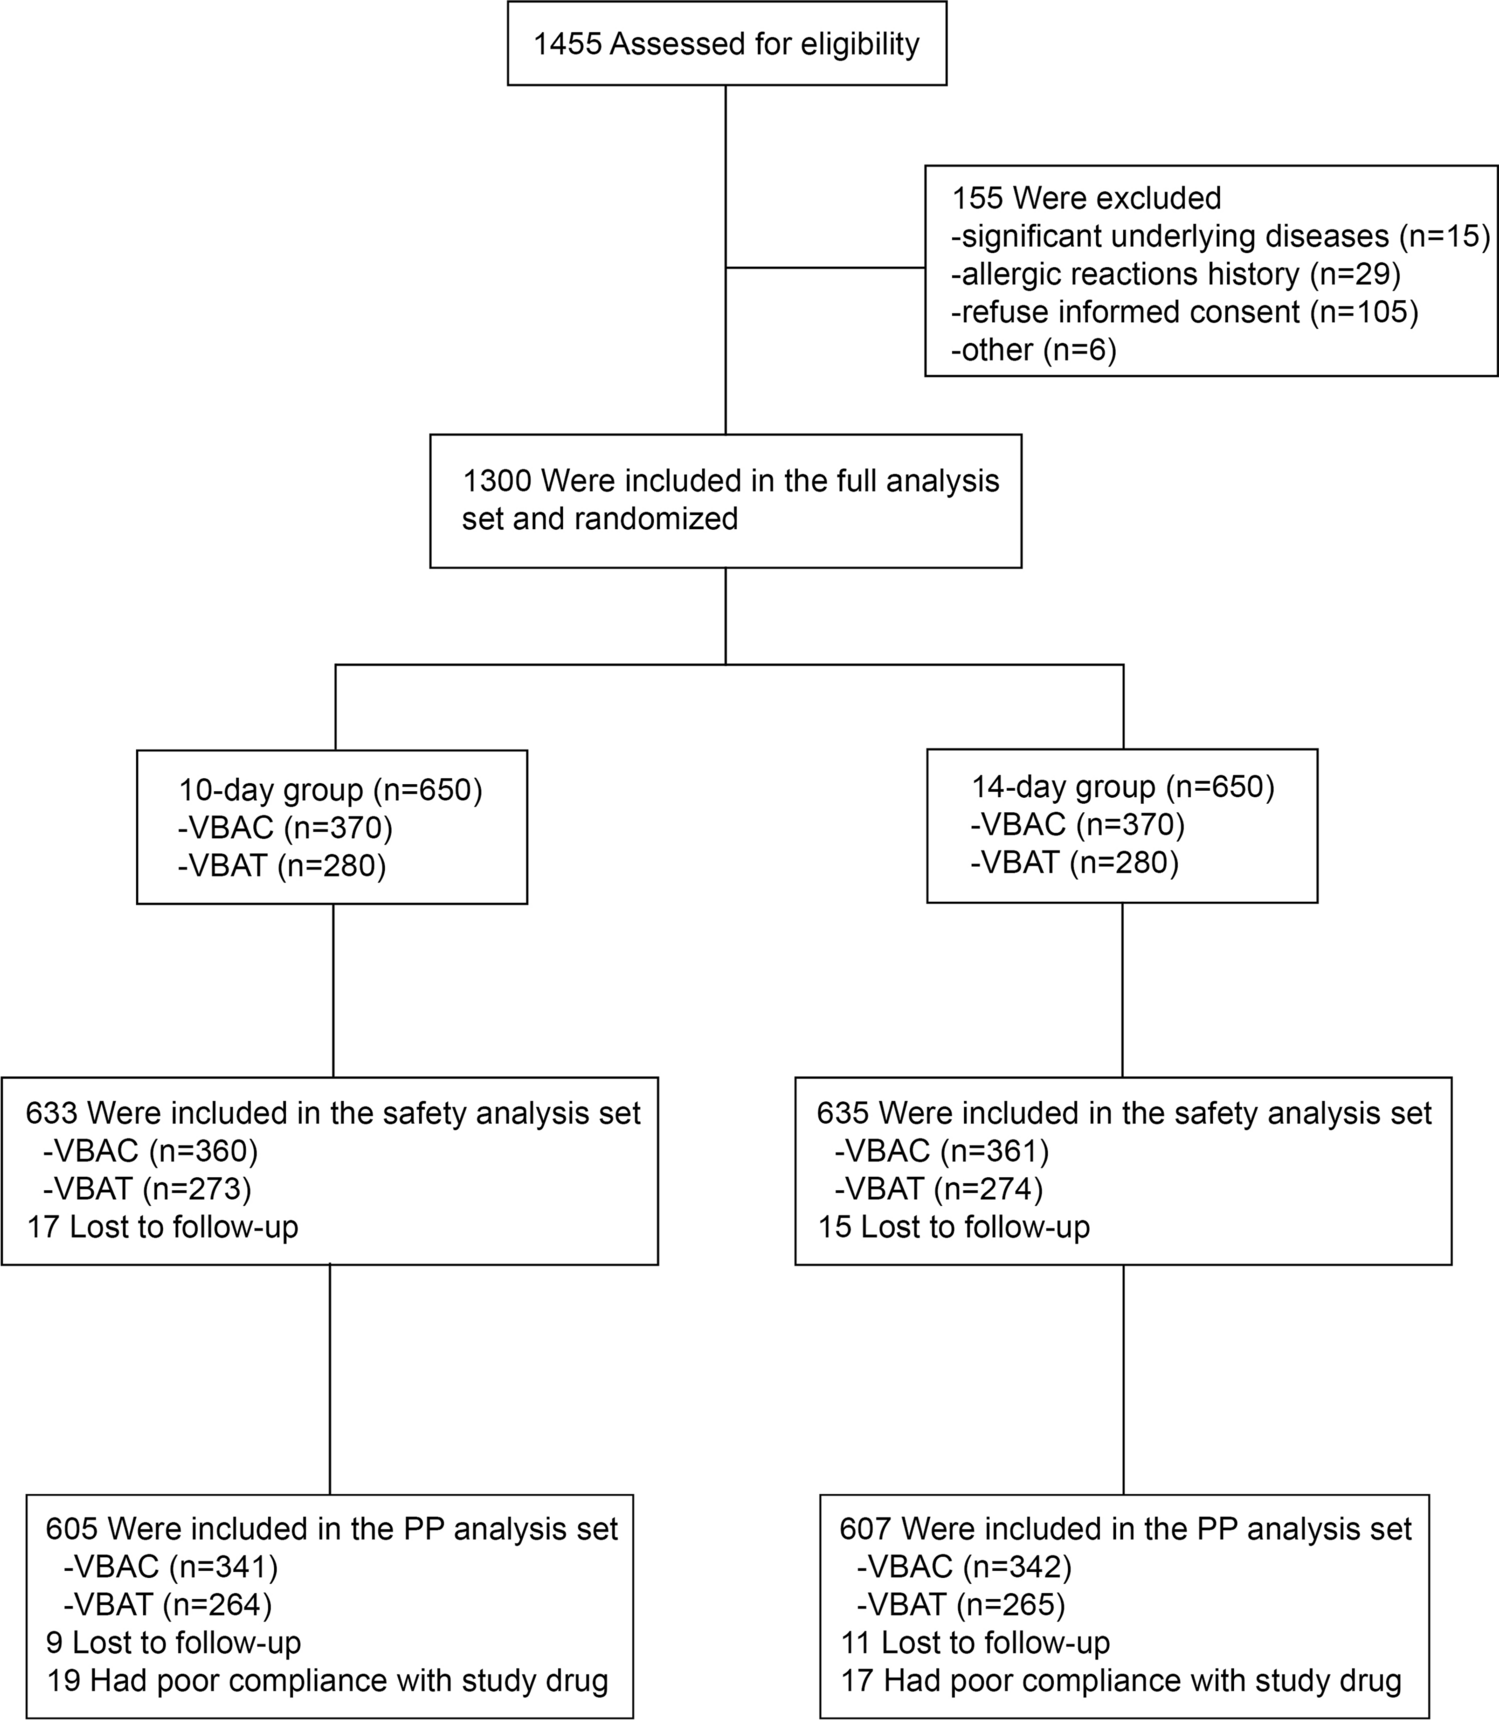 Bismuth-Containing Quadruple Therapy for Helicobacter pylori Eradication: A Randomized Clinical Trial of 10 and 14 Days